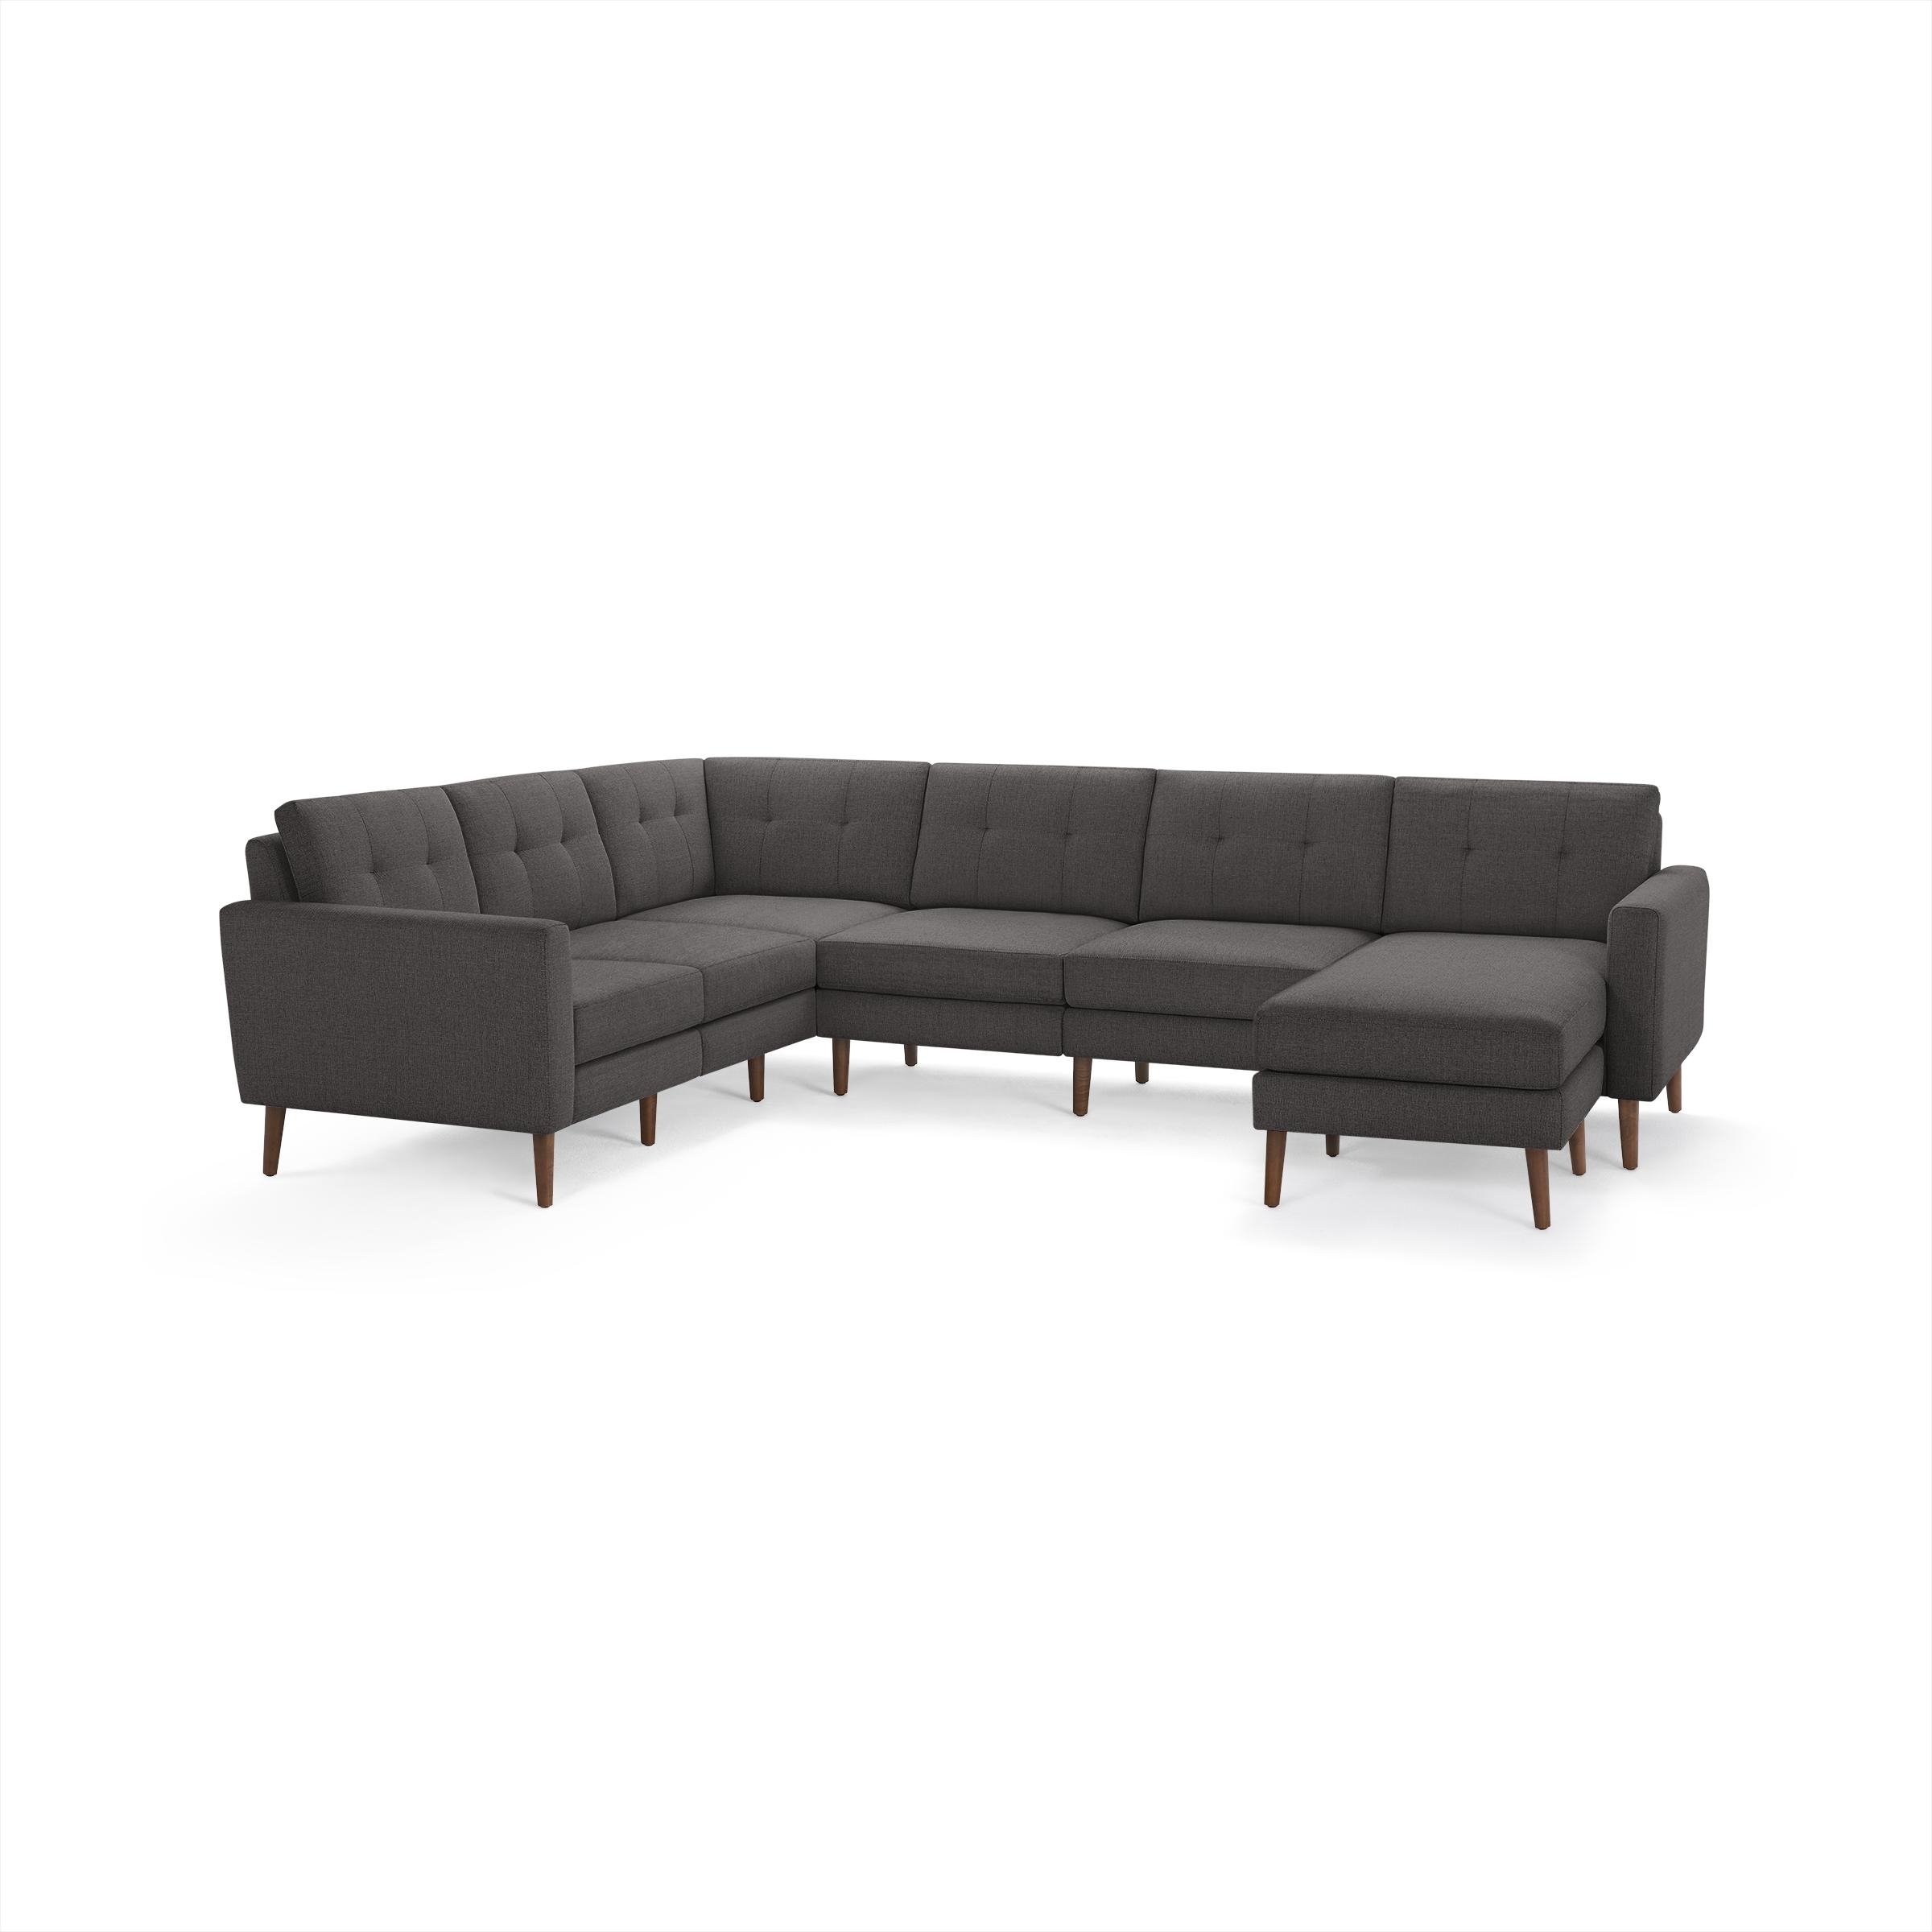 Nomad 6-Seat Corner Sectional with Chaise in Charcoal, Leg Finish: WalnutLegs - Image 0